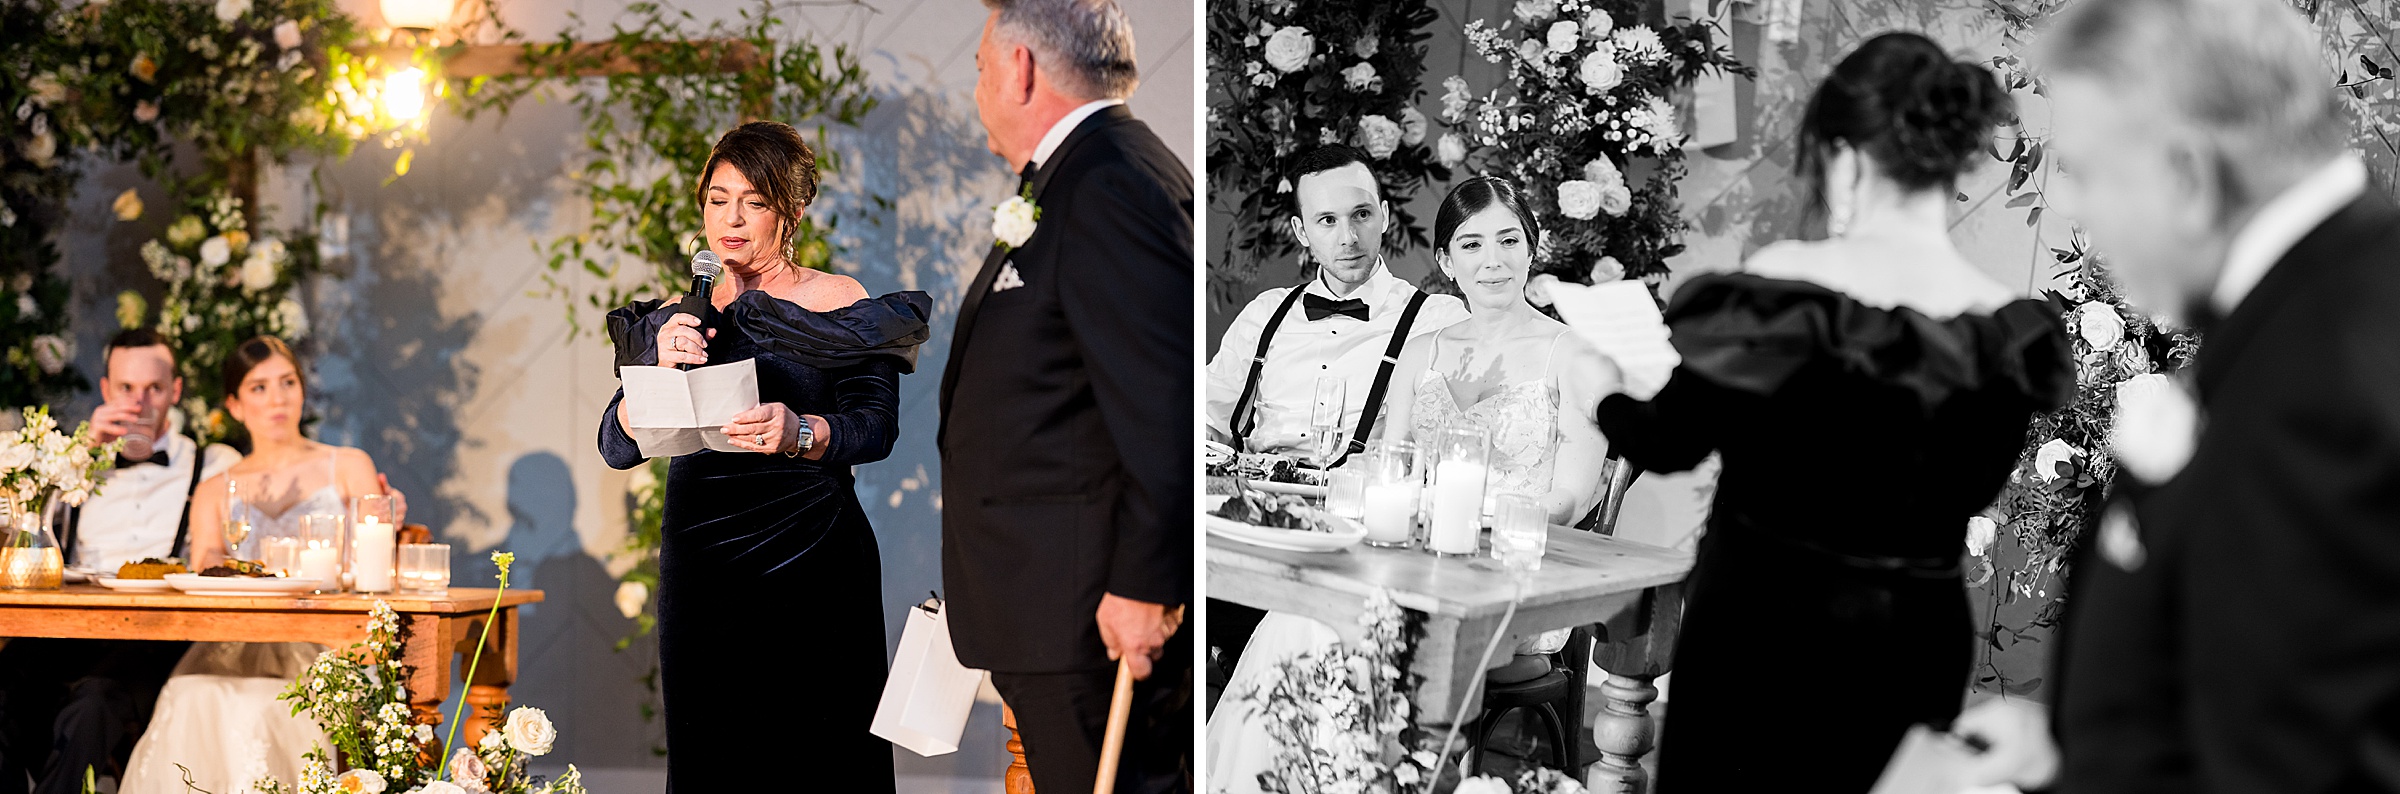 Two photos of a woman giving a toast at a Lilah Events wedding.